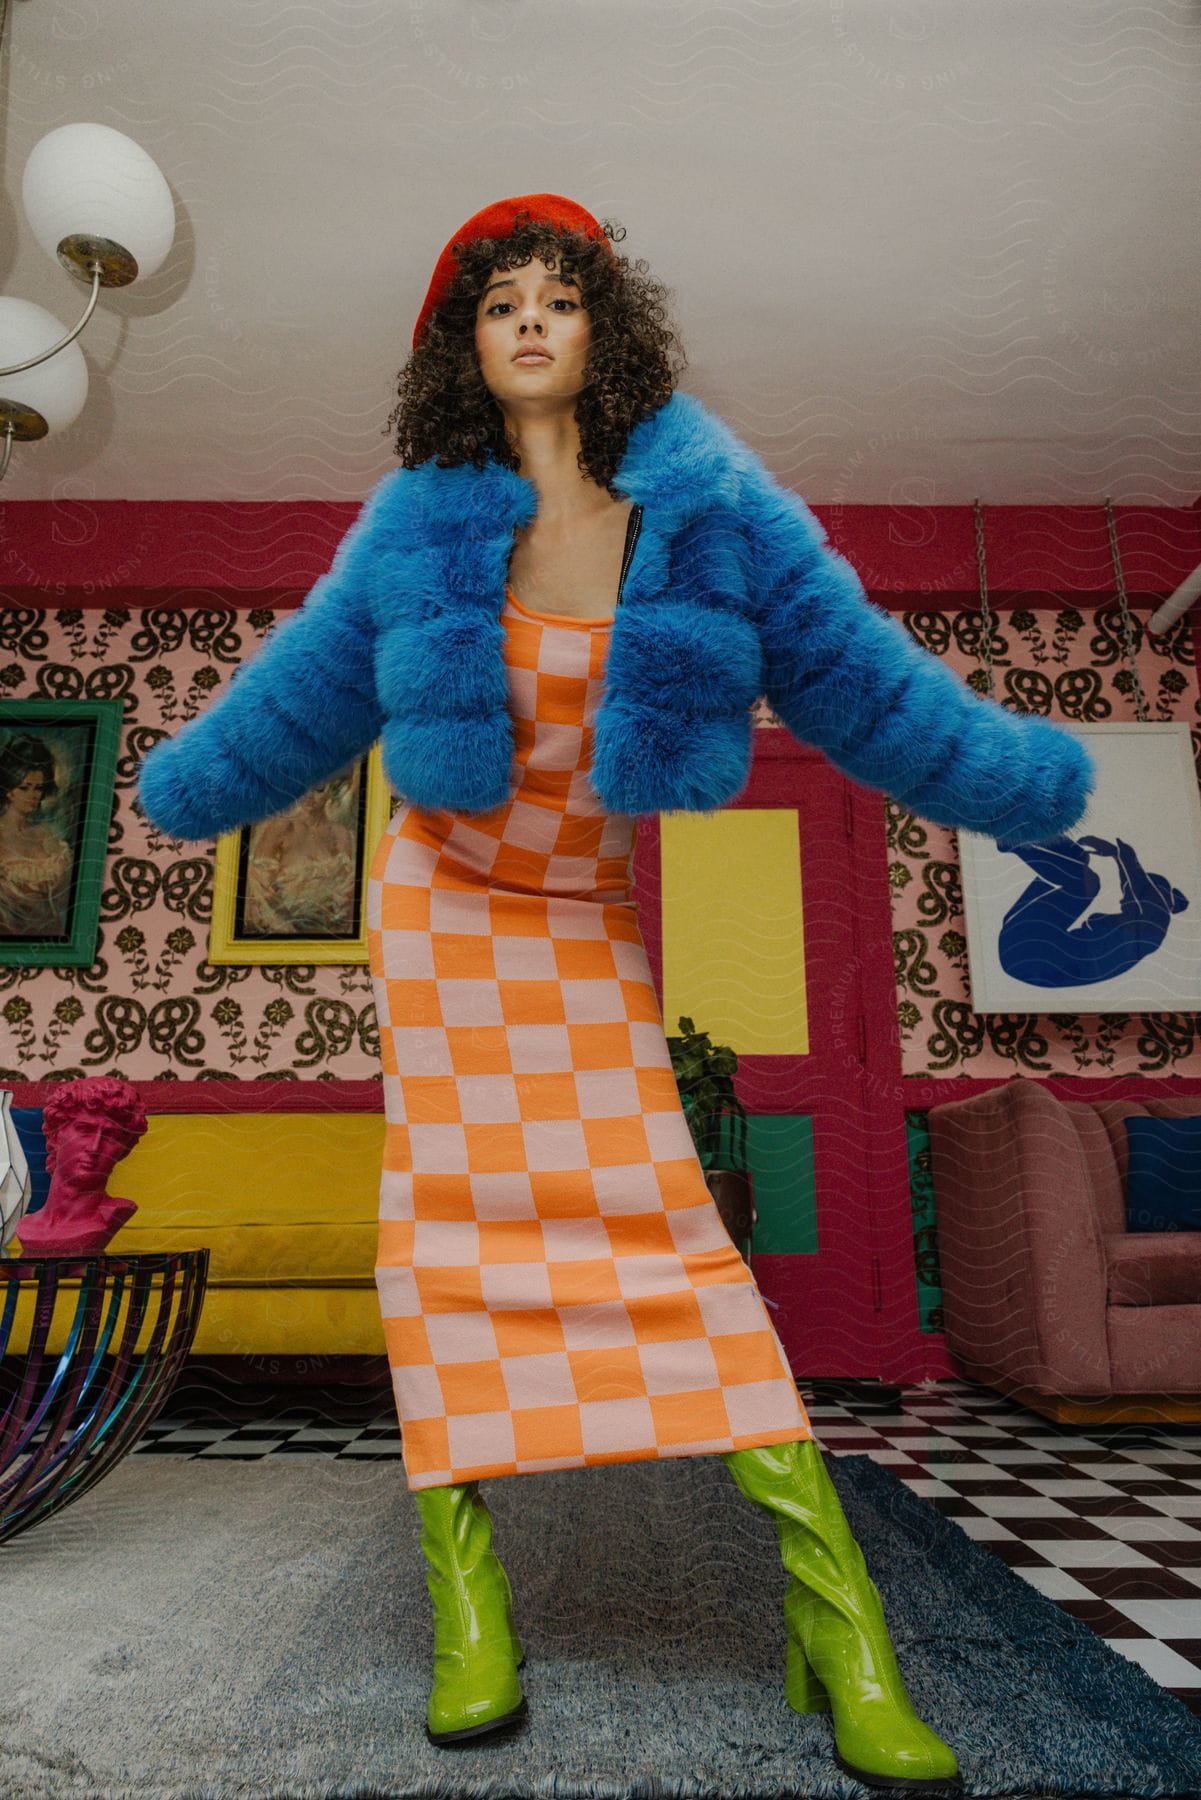 A young woman stands with her arms out while modeling a blue coat and checkerboard dress.